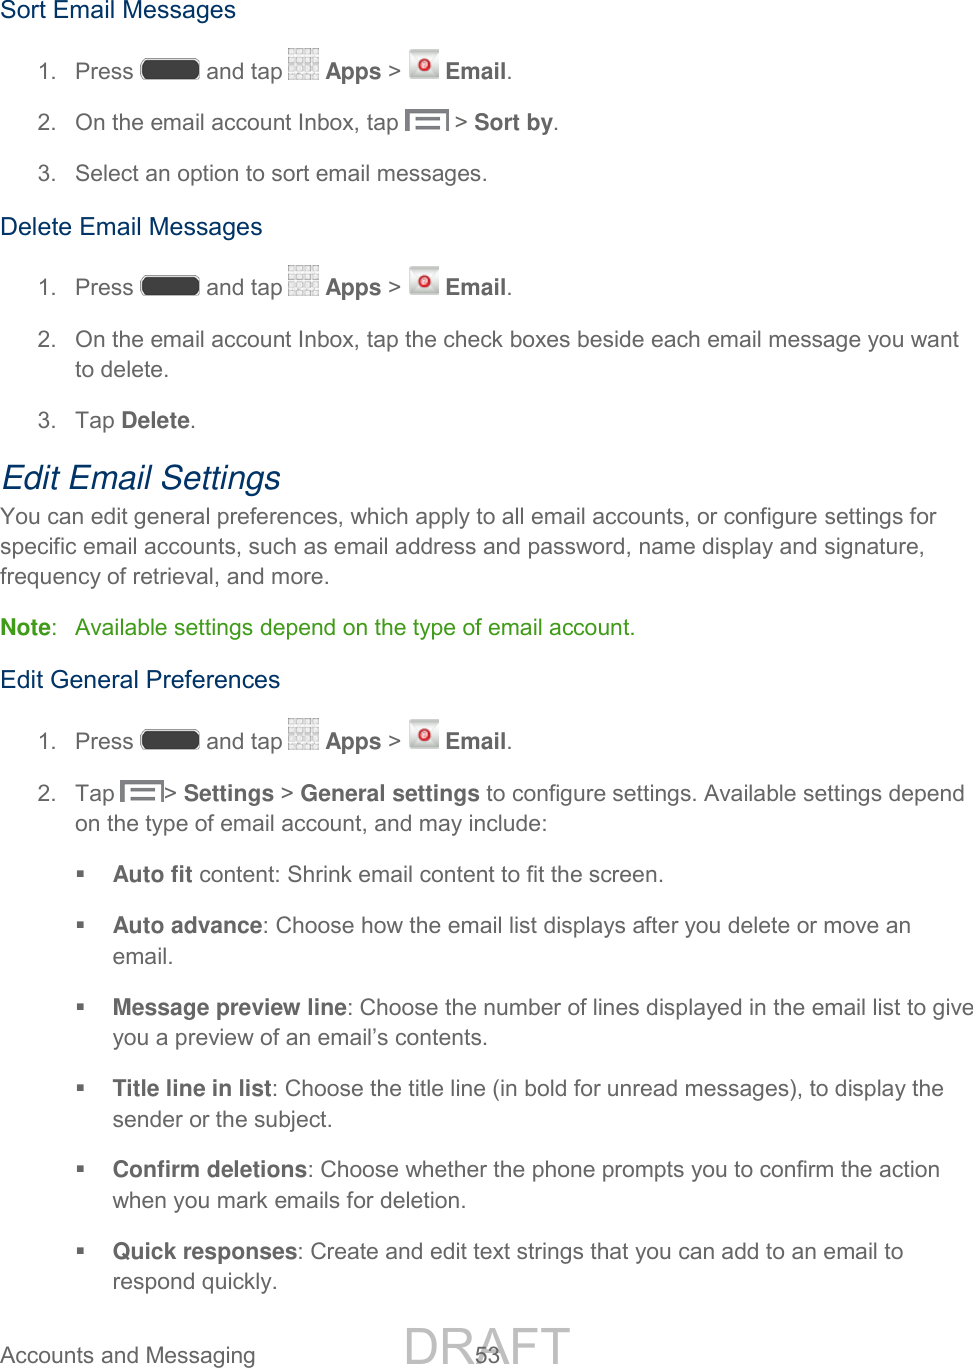 DRAFT FOR INTERNAL USE ONLY Accounts and Messaging  53    Sort Email Messages 1.  Press   and tap   Apps &gt;   Email. 2.  On the email account Inbox, tap   &gt; Sort by. 3.  Select an option to sort email messages. Delete Email Messages 1.  Press   and tap   Apps &gt;   Email. 2.  On the email account Inbox, tap the check boxes beside each email message you want to delete. 3.  Tap Delete. Edit Email Settings You can edit general preferences, which apply to all email accounts, or configure settings for specific email accounts, such as email address and password, name display and signature, frequency of retrieval, and more. Note:  Available settings depend on the type of email account. Edit General Preferences 1.  Press   and tap   Apps &gt;   Email. 2.  Tap  &gt; Settings &gt; General settings to configure settings. Available settings depend on the type of email account, and may include:  Auto fit content: Shrink email content to fit the screen.  Auto advance: Choose how the email list displays after you delete or move an email.  Message preview line: Choose the number of lines displayed in the email list to give you a preview of an email’s contents.  Title line in list: Choose the title line (in bold for unread messages), to display the sender or the subject.  Confirm deletions: Choose whether the phone prompts you to confirm the action when you mark emails for deletion.  Quick responses: Create and edit text strings that you can add to an email to respond quickly. 